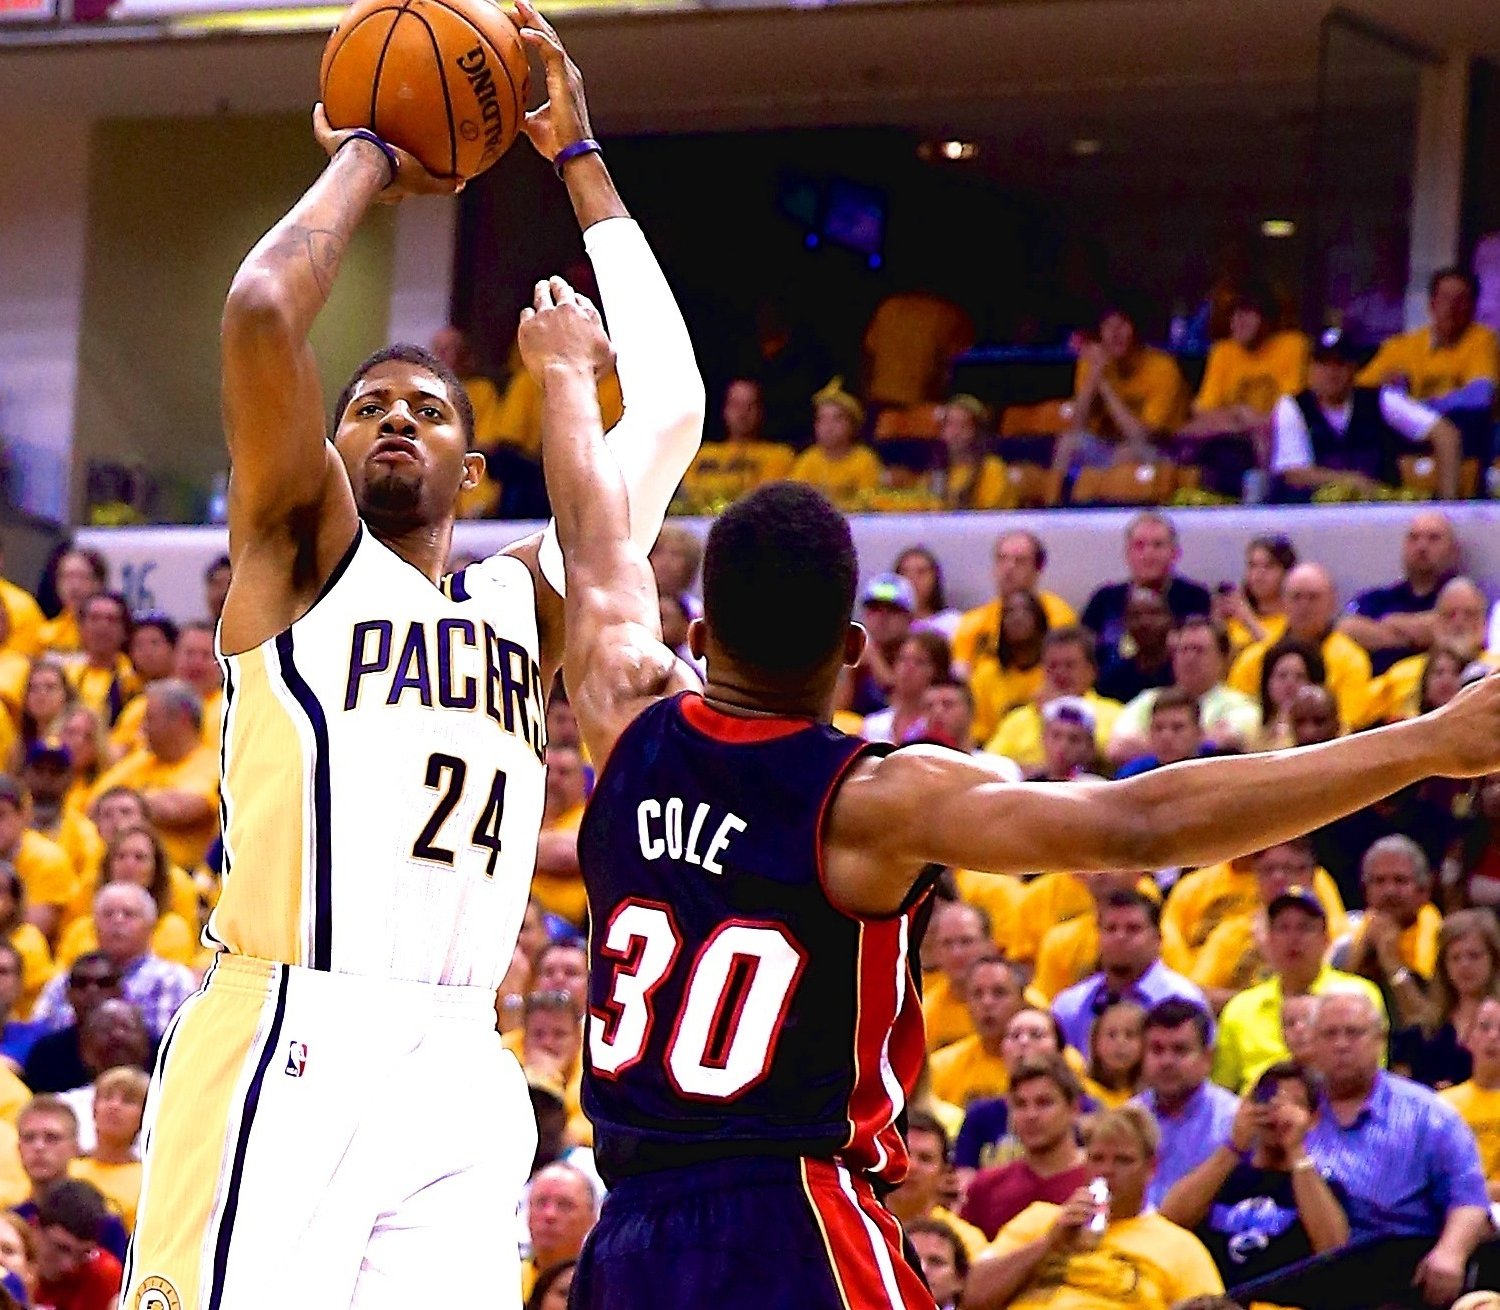 Heat vs. Pacers Game 5 Score and Twitter Reaction from 2014 NBA